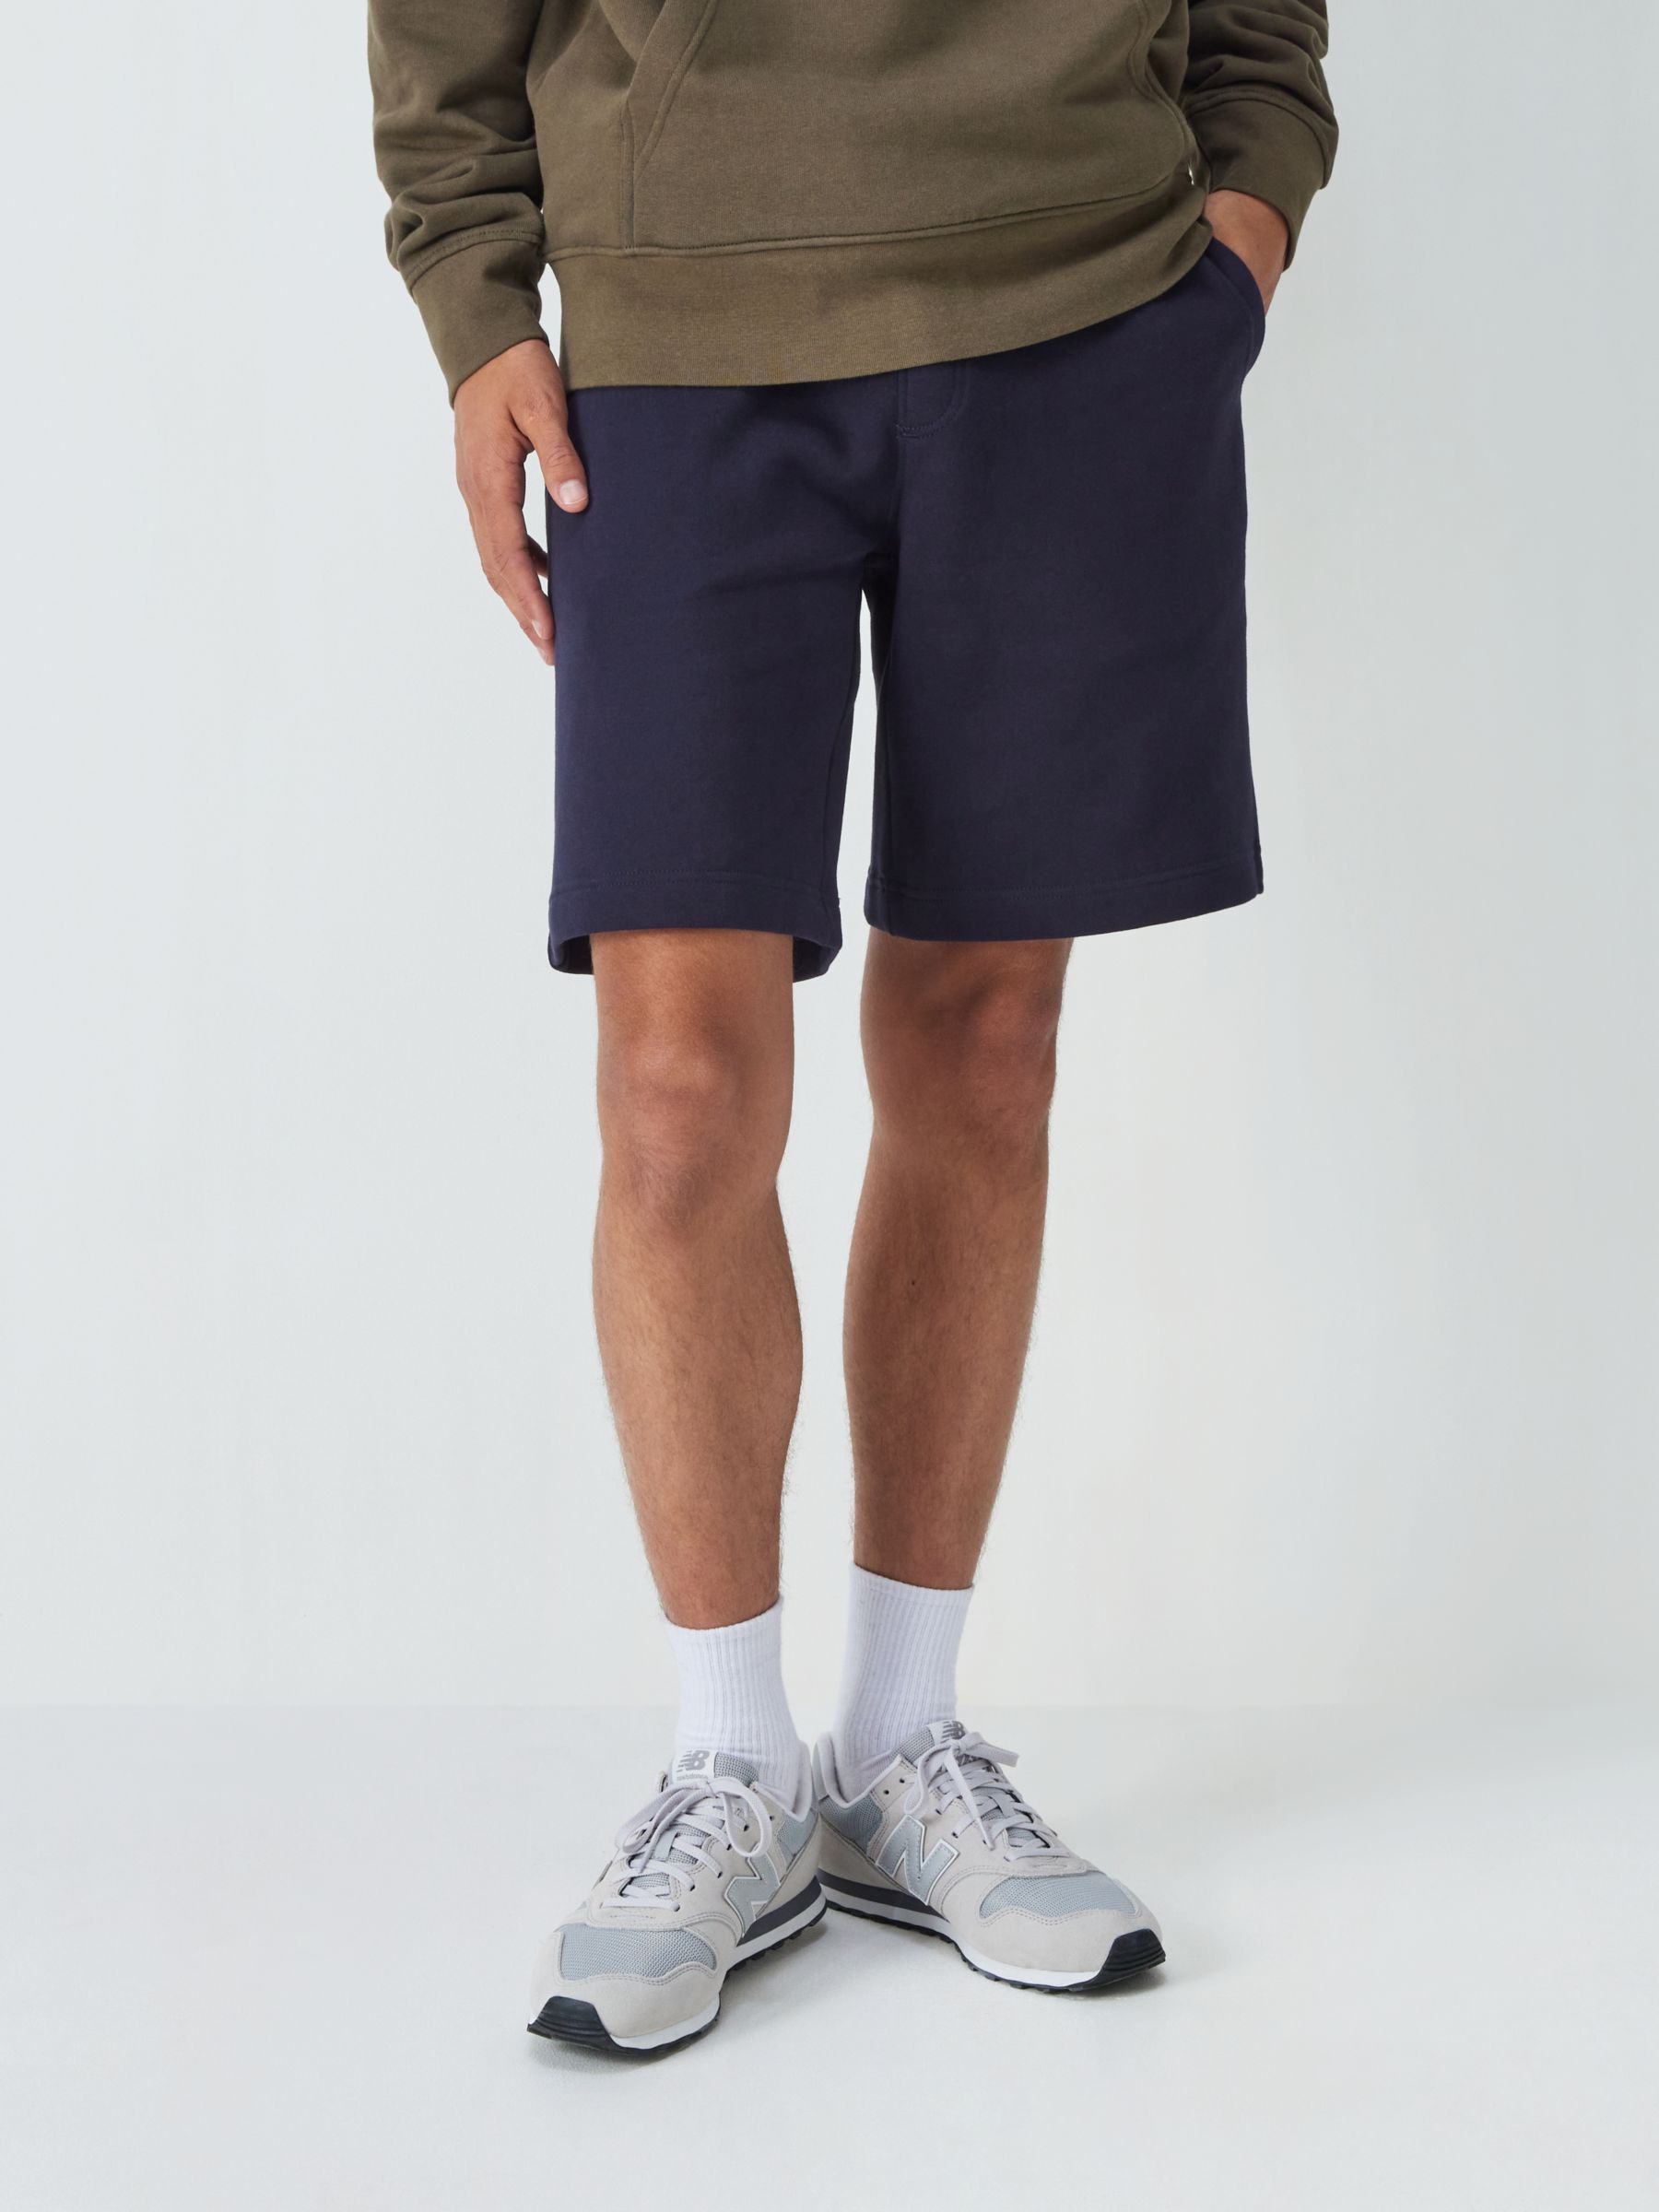 John Lewis ANYDAY Casual Sweat Shorts, Navy, S